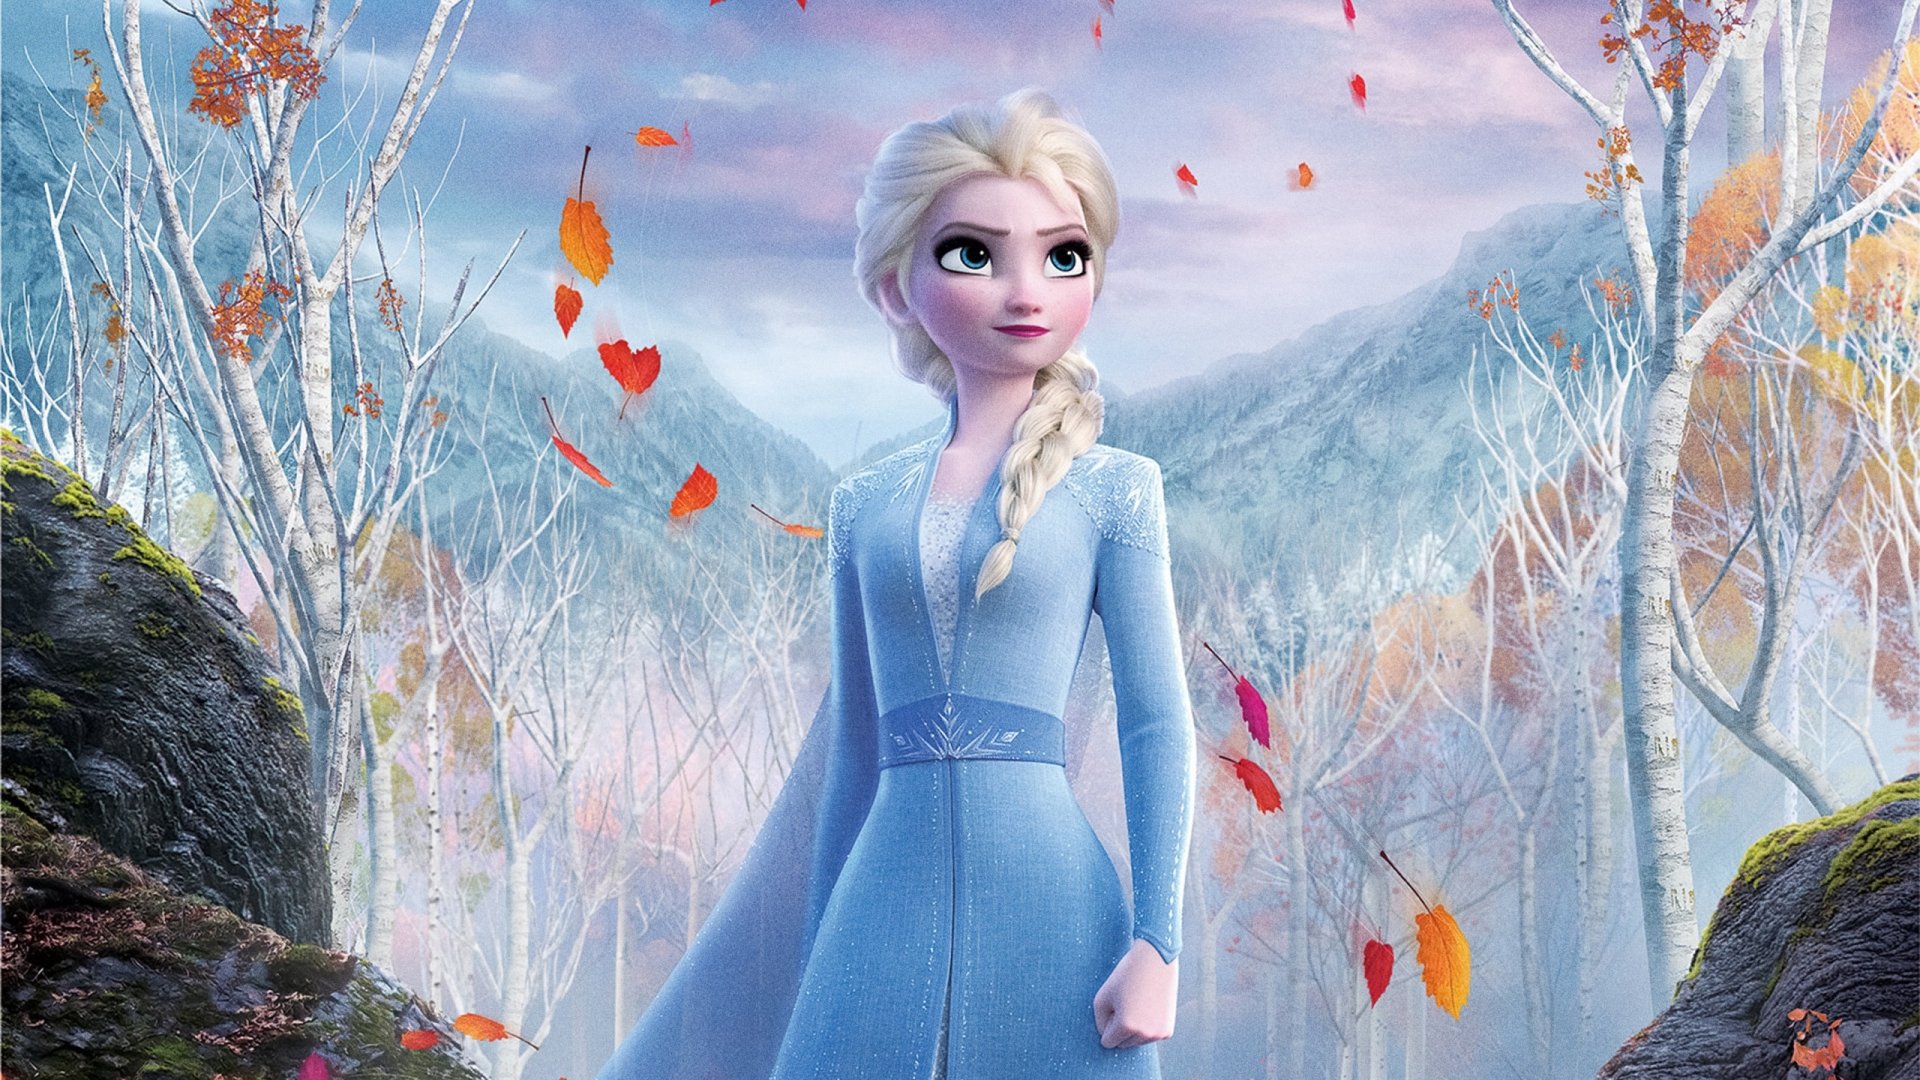 Frozen download the new for android